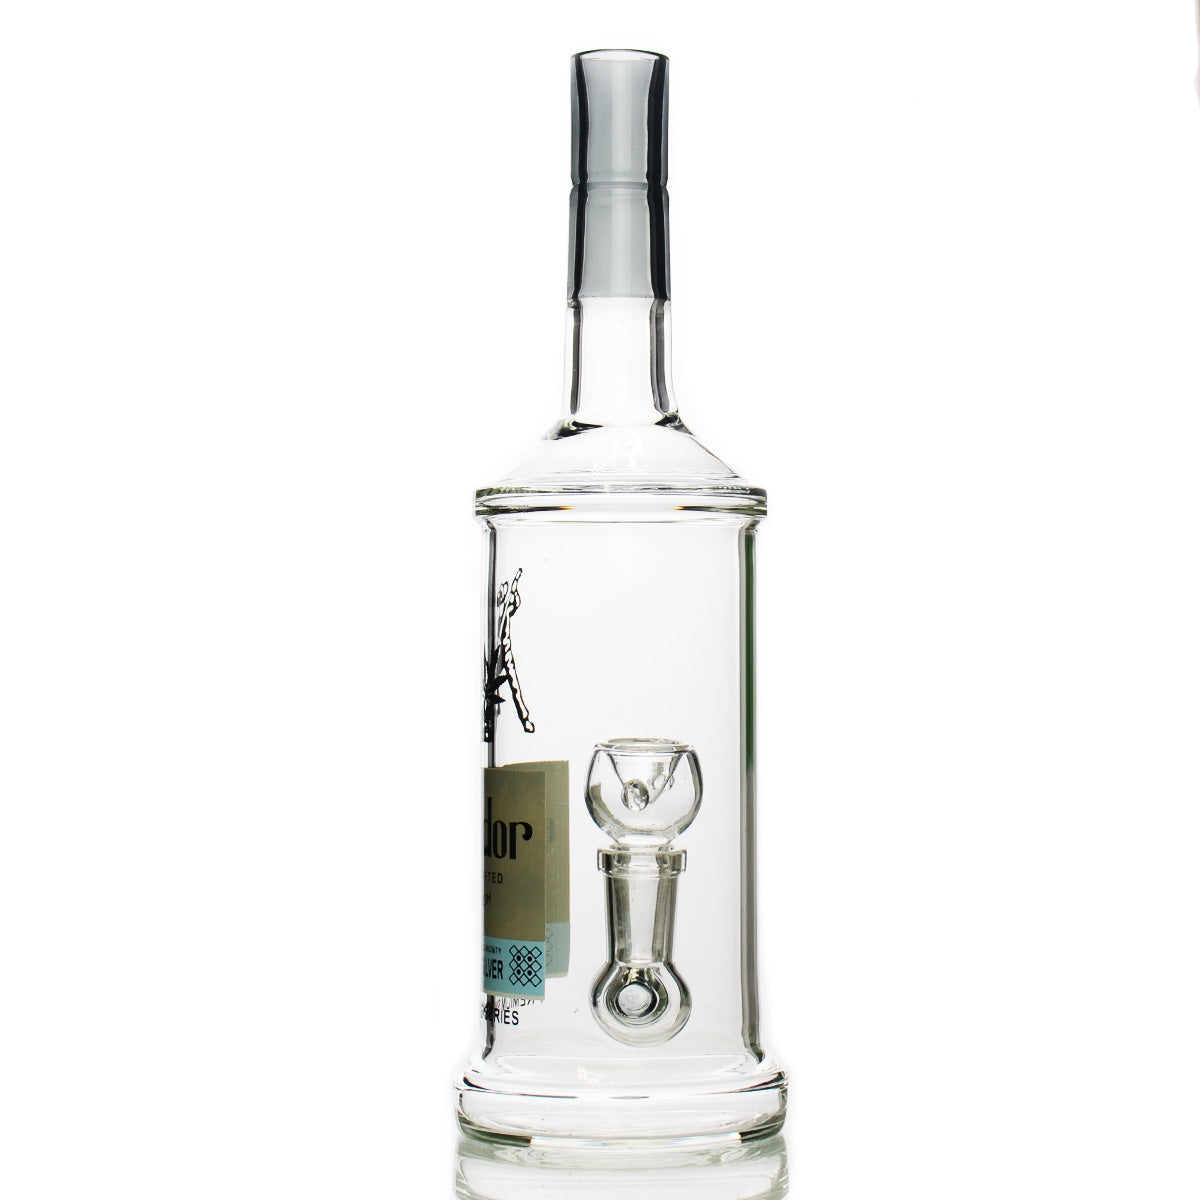 11" El Timador Tequila Bottle 100% High with 14mm Male Bowl